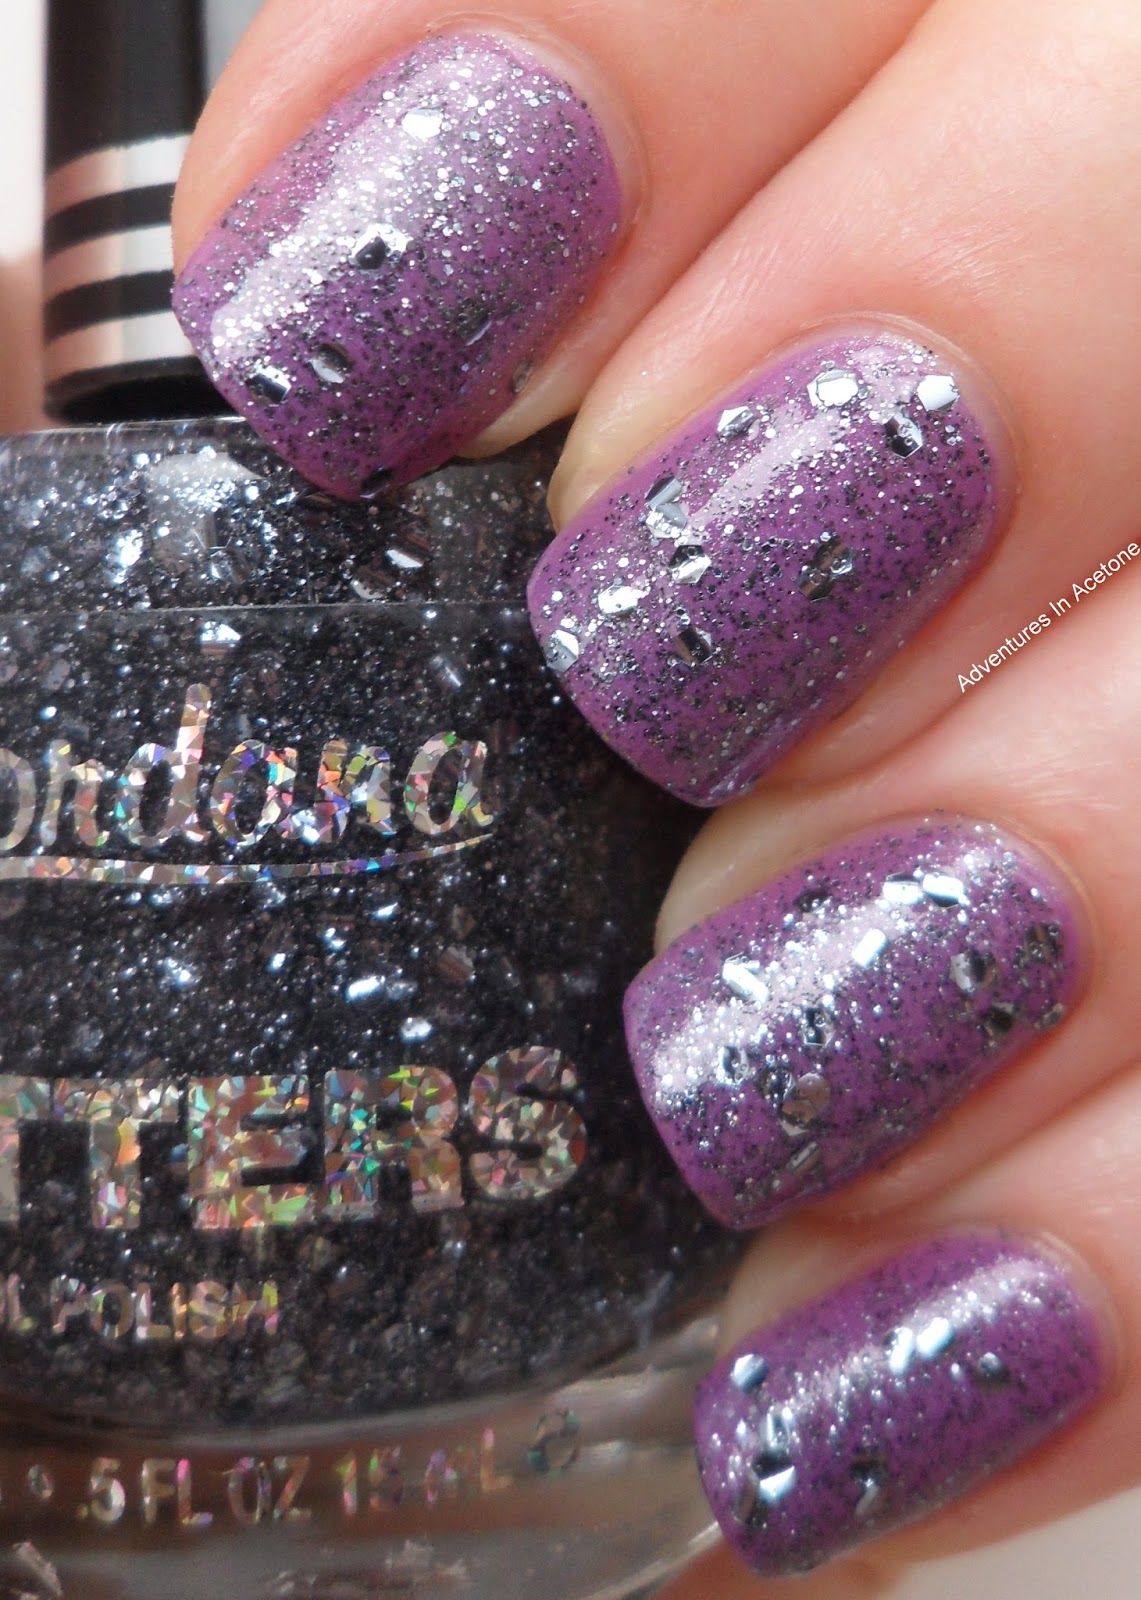 Jordana Glitters Swatches and Review! - Adventures In Acetone